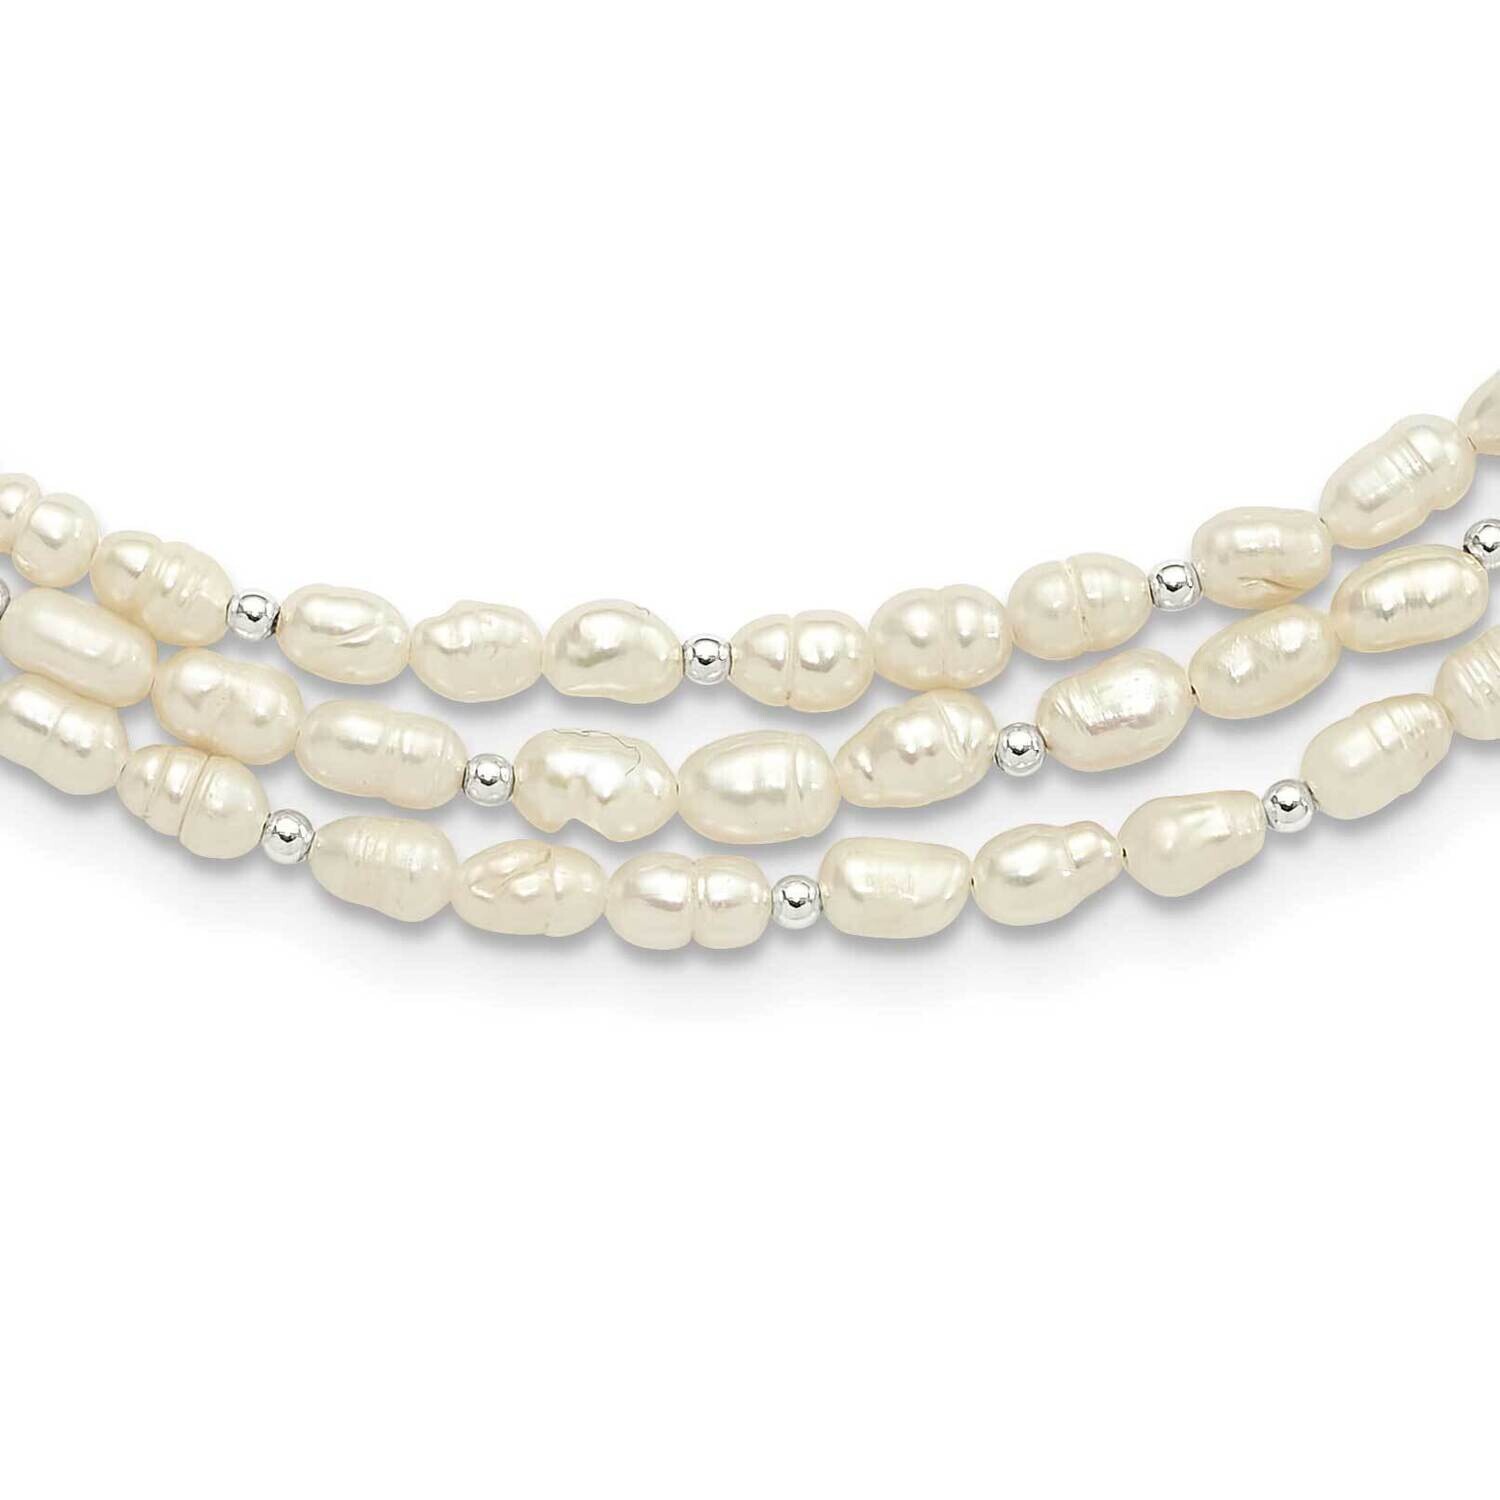 Fwc Pearl 3-Str18 Inch 2 Inch Extension Necklace Sterling Silver QH5698-18